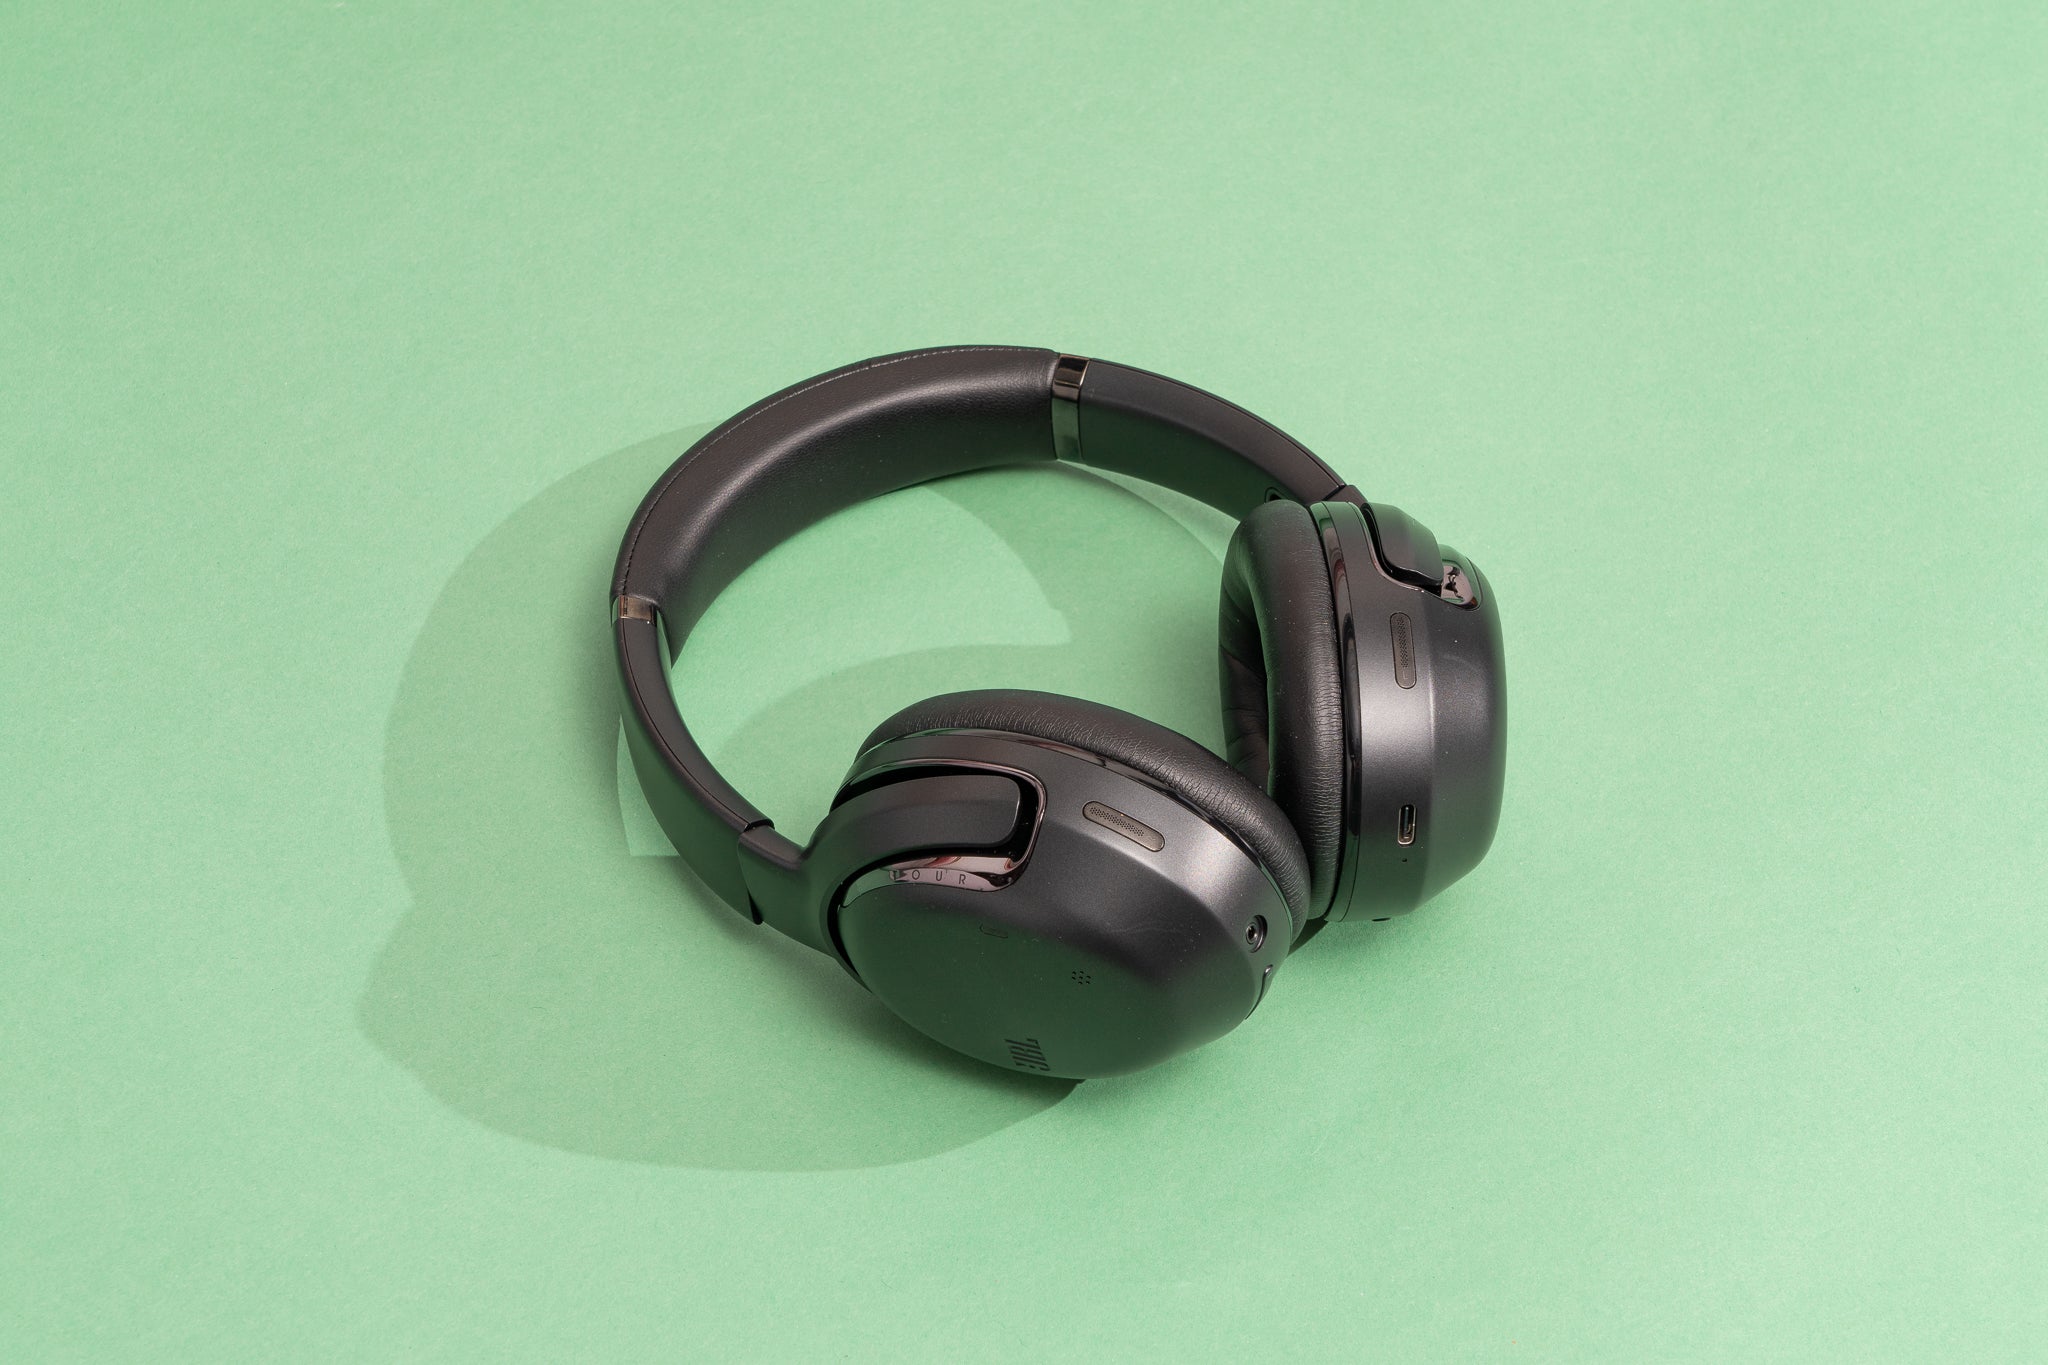 Troubleshooting Connection Issues: Why Bluetooth Headphones Won’t Connect To Your Phone